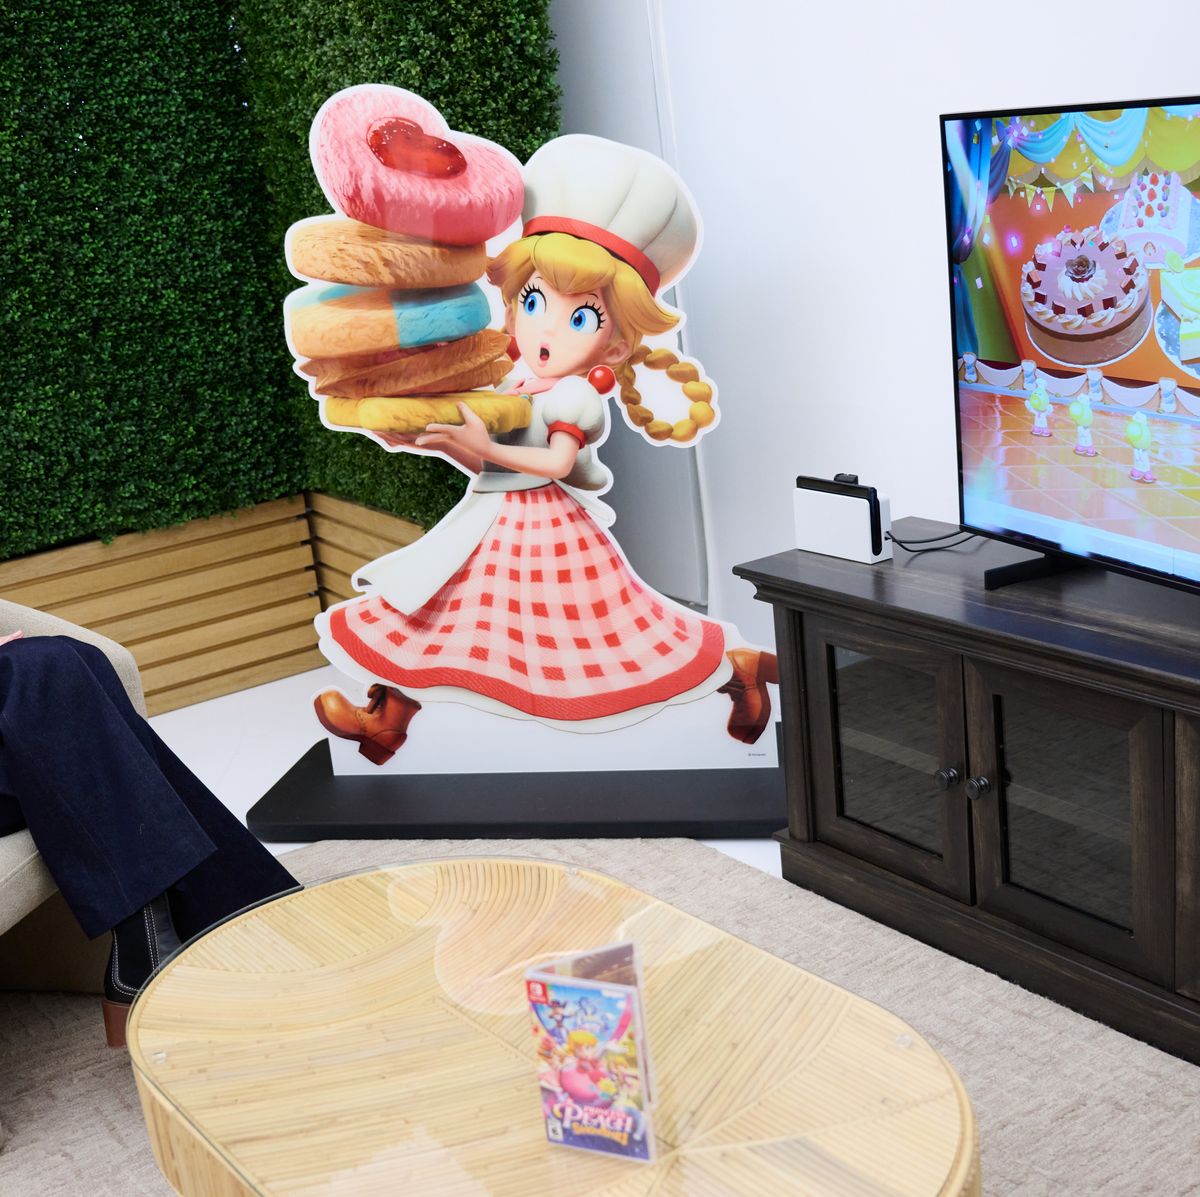 A new game starring Princess Peach, heading to Nintendo Switch in